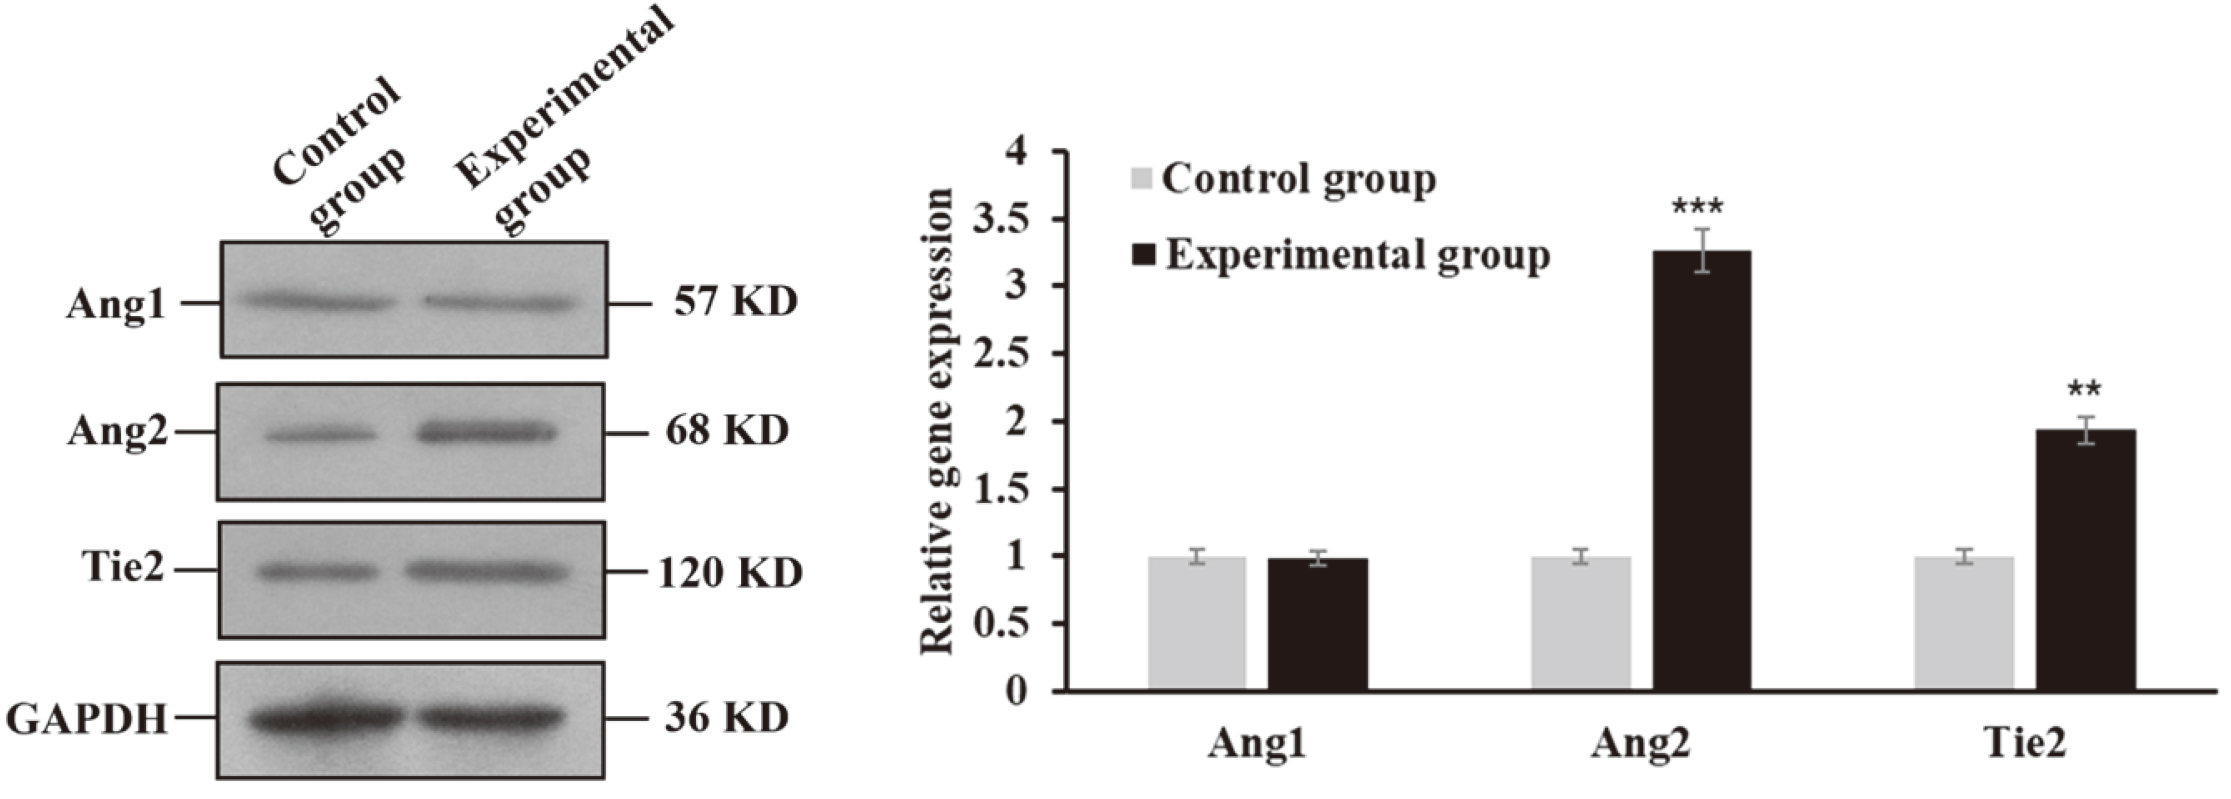 Ang2 and Tie2 were up-regulated by hydroxyapatite bioceramic extract (**P< 0.01, ***P< 0.001).